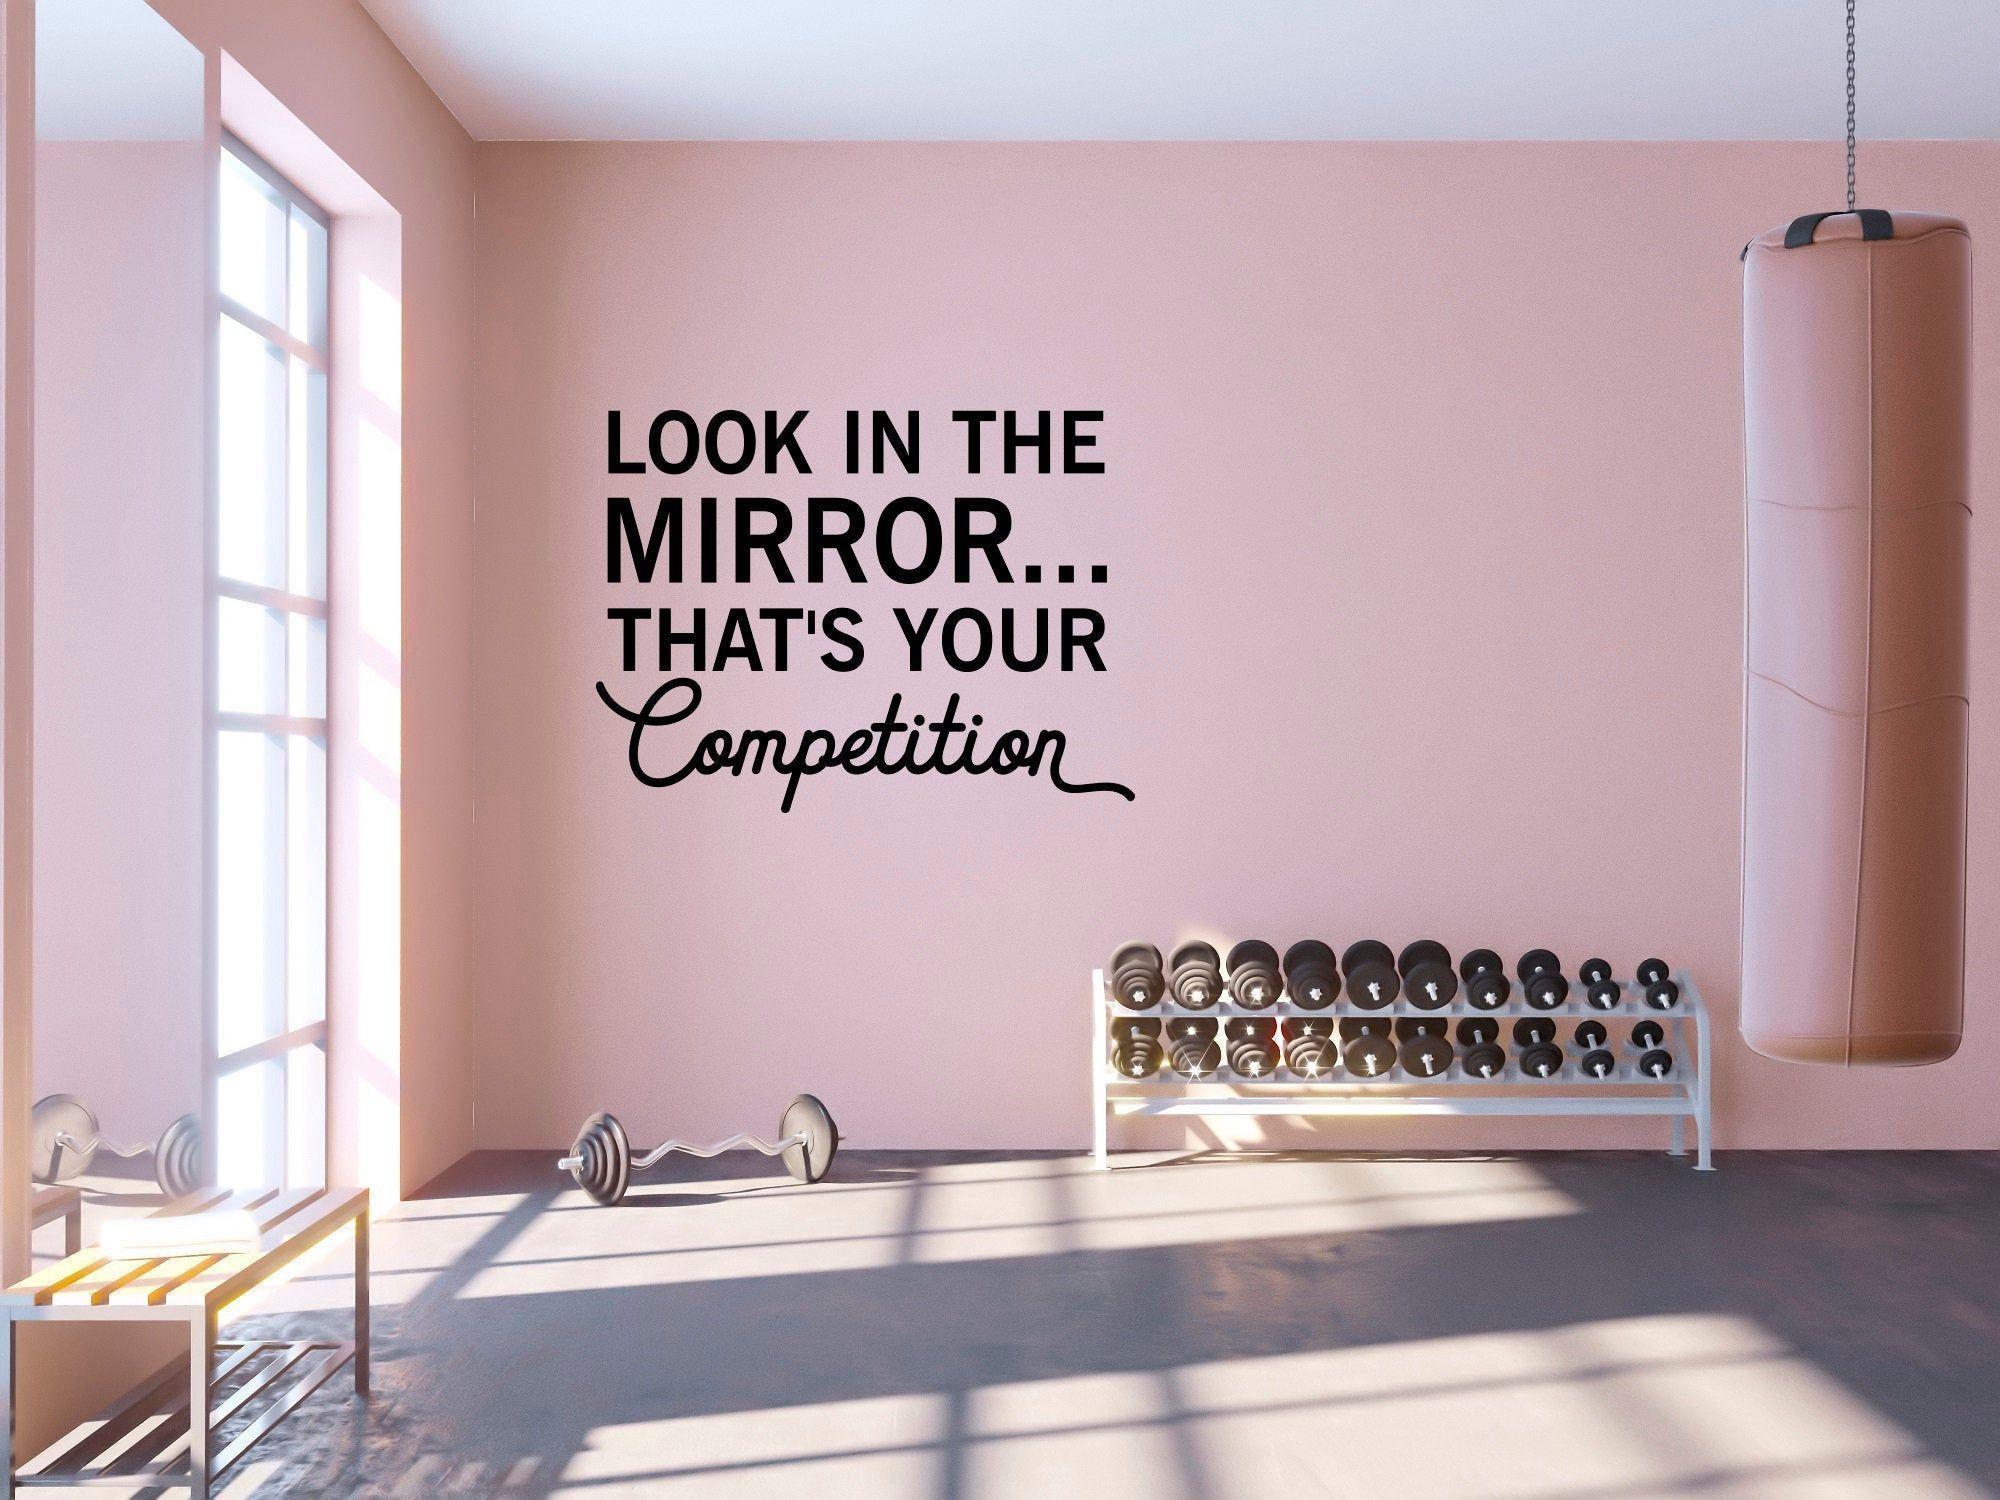 Look in the Mirror...That's Your Competition Quote Wall Decal - Sport Vinyl Stickers, Motivational Gym Decal, Fitness Quote Wall Decal SB155 -   19 fitness Room mall ideas